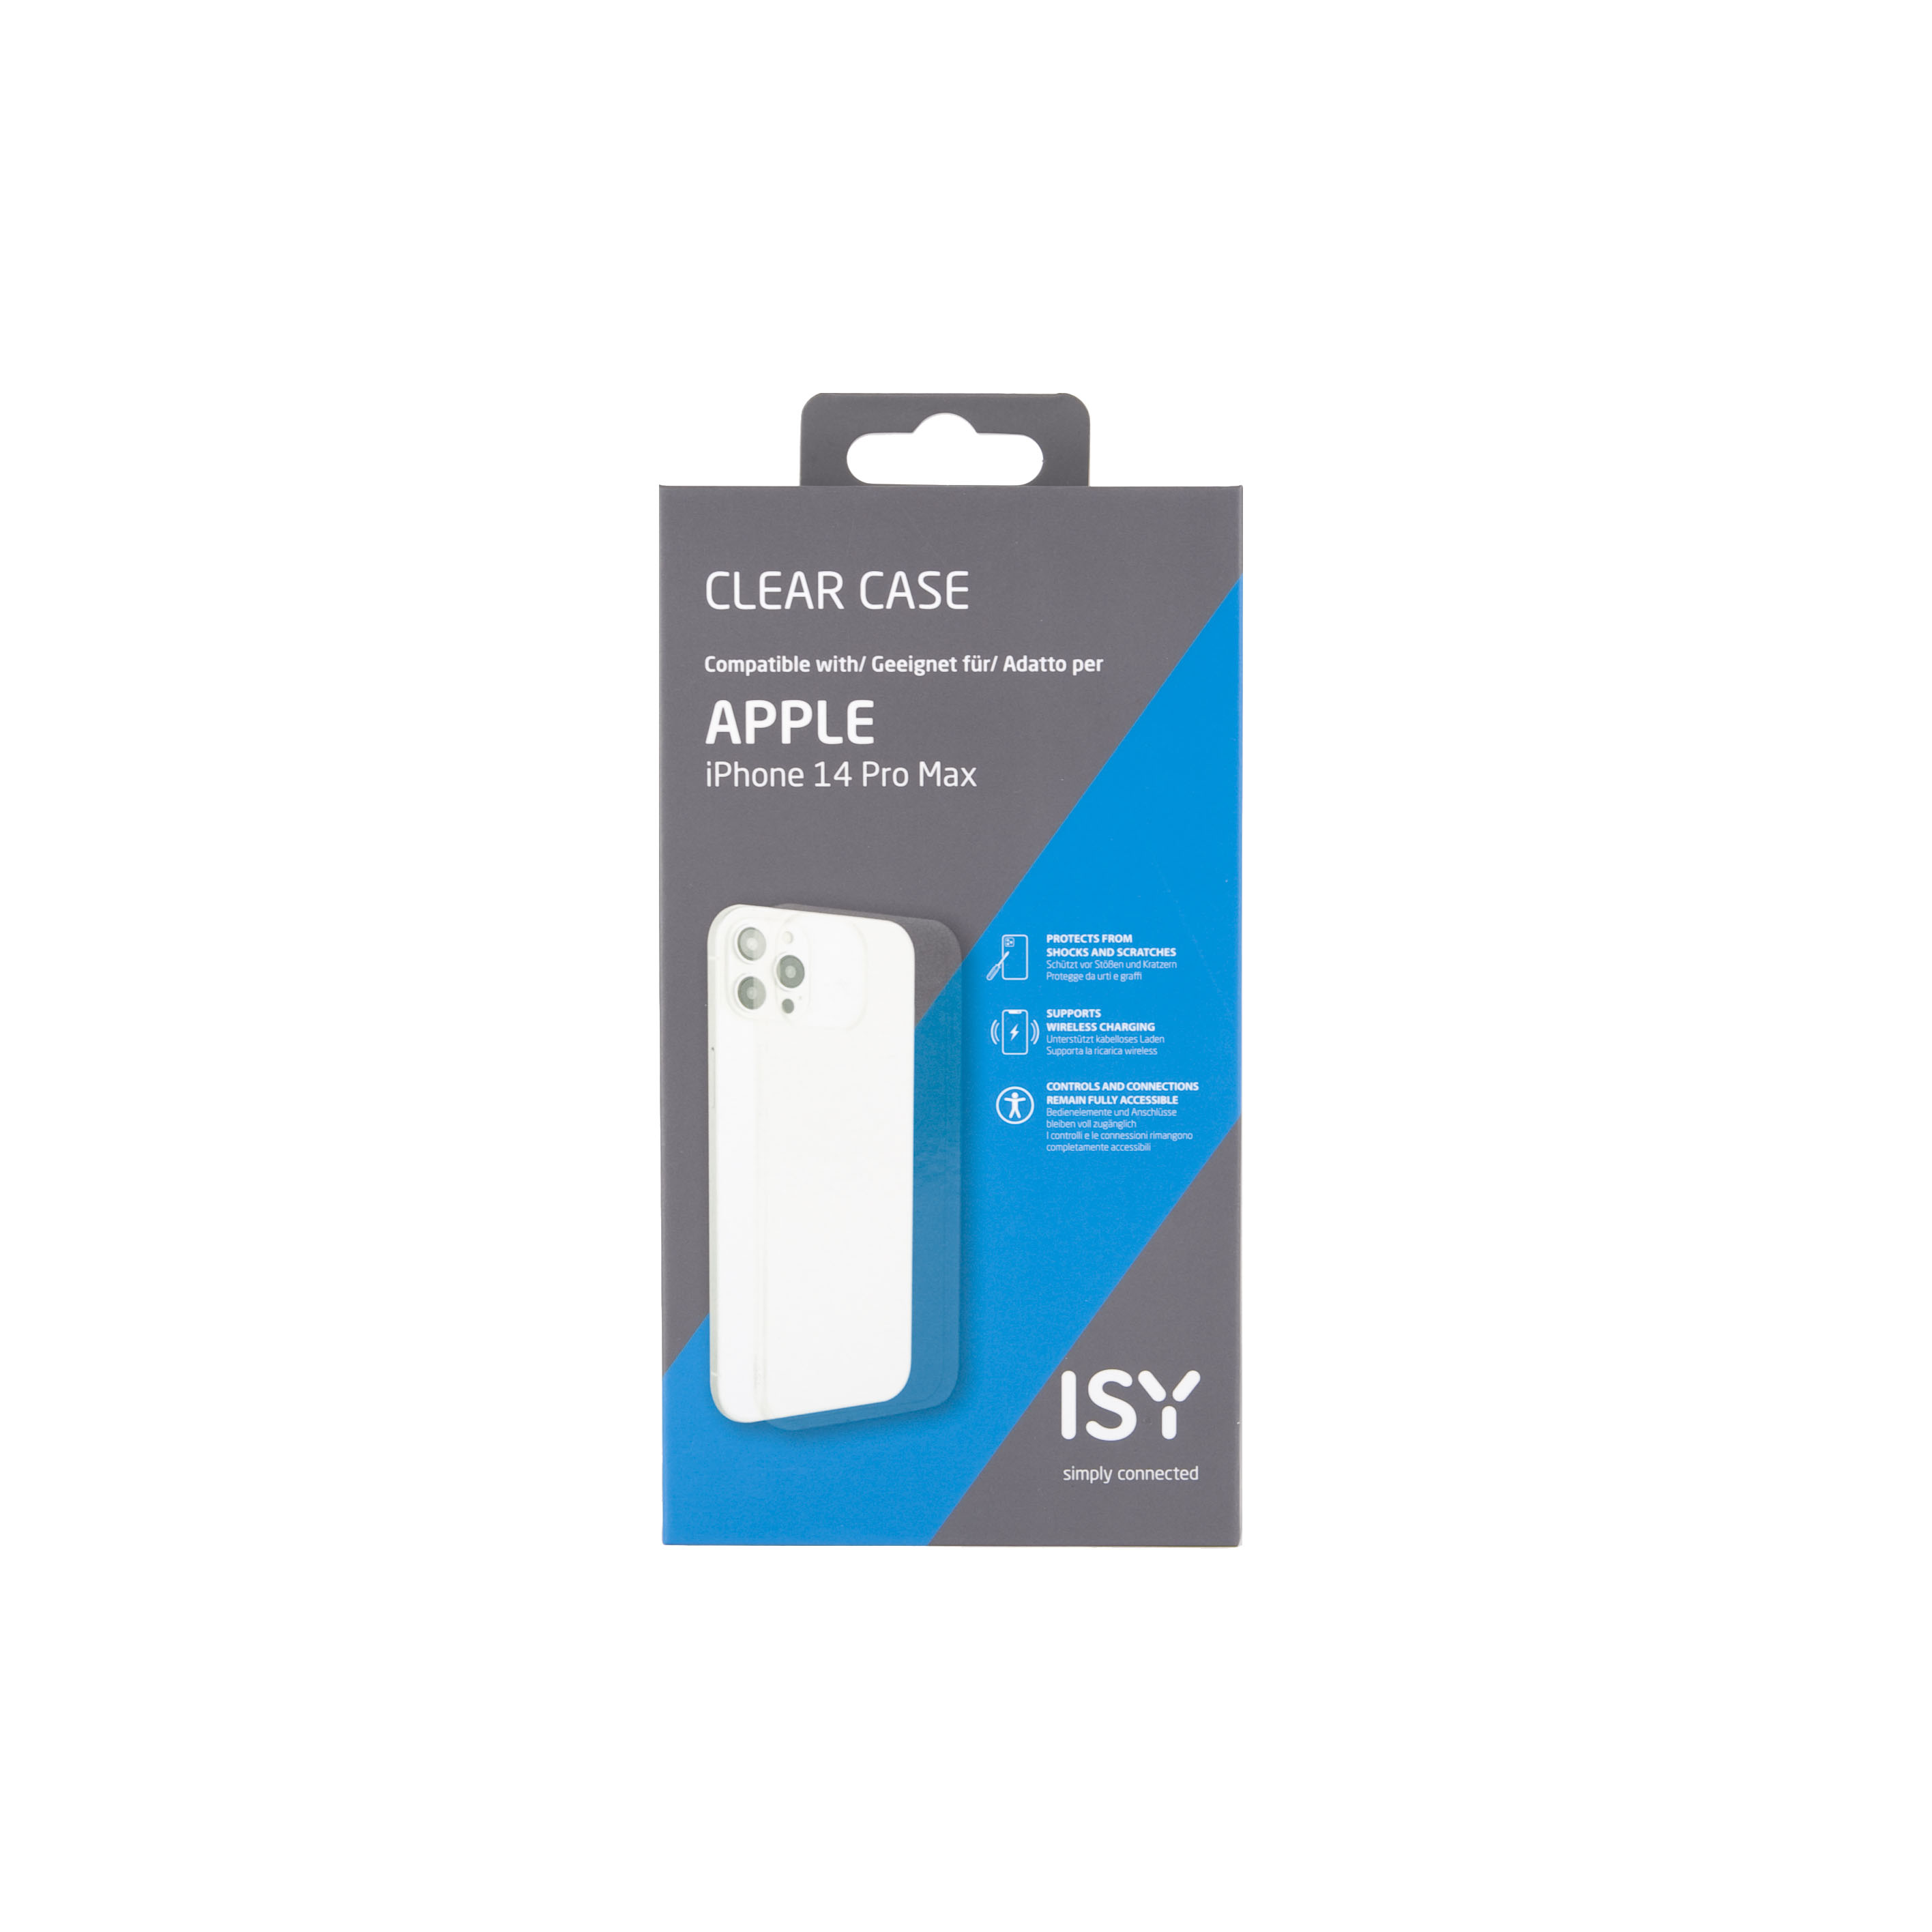 ISY ISC-1028, Backcover, Apple, Transparent 14 , Max Pro iPhone